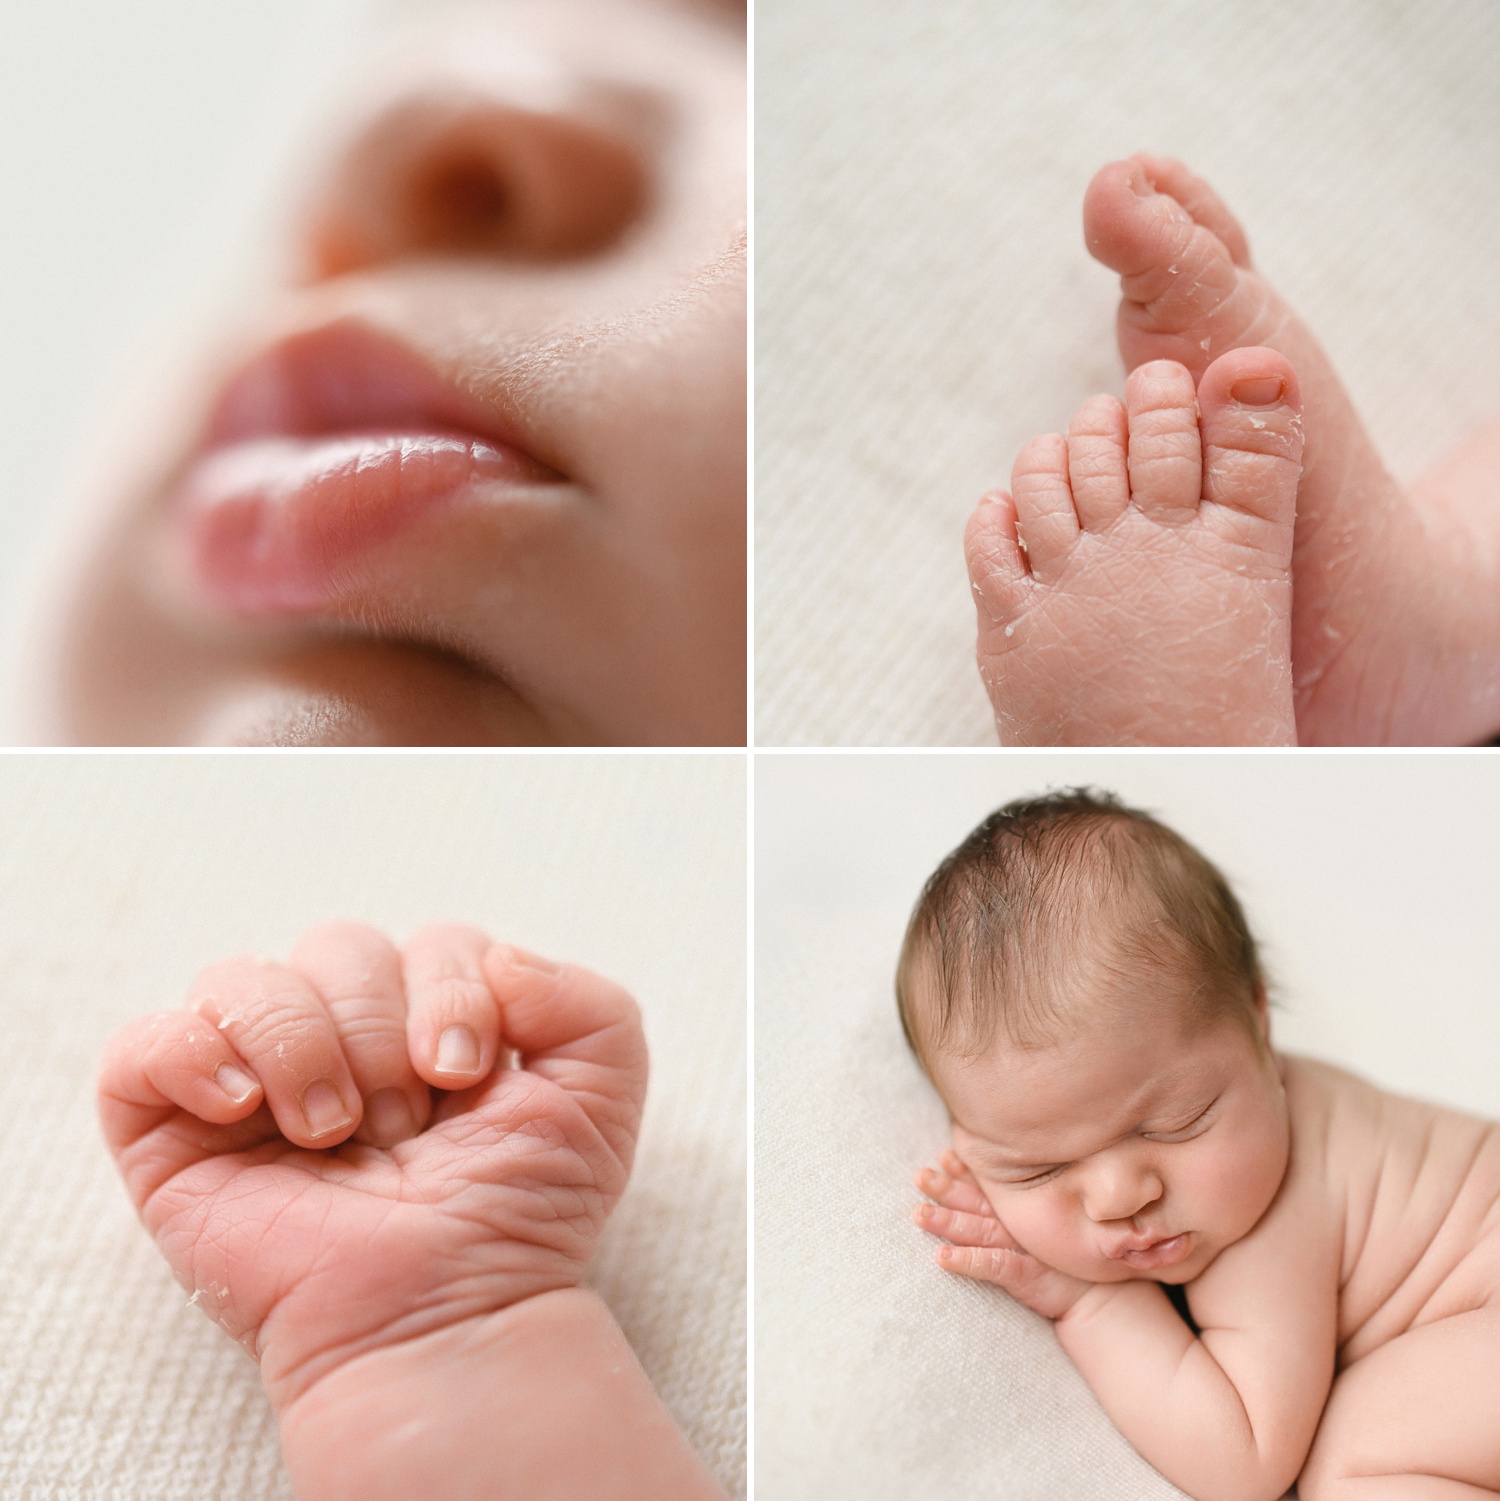 newborn photography tiny details lips toes, hands